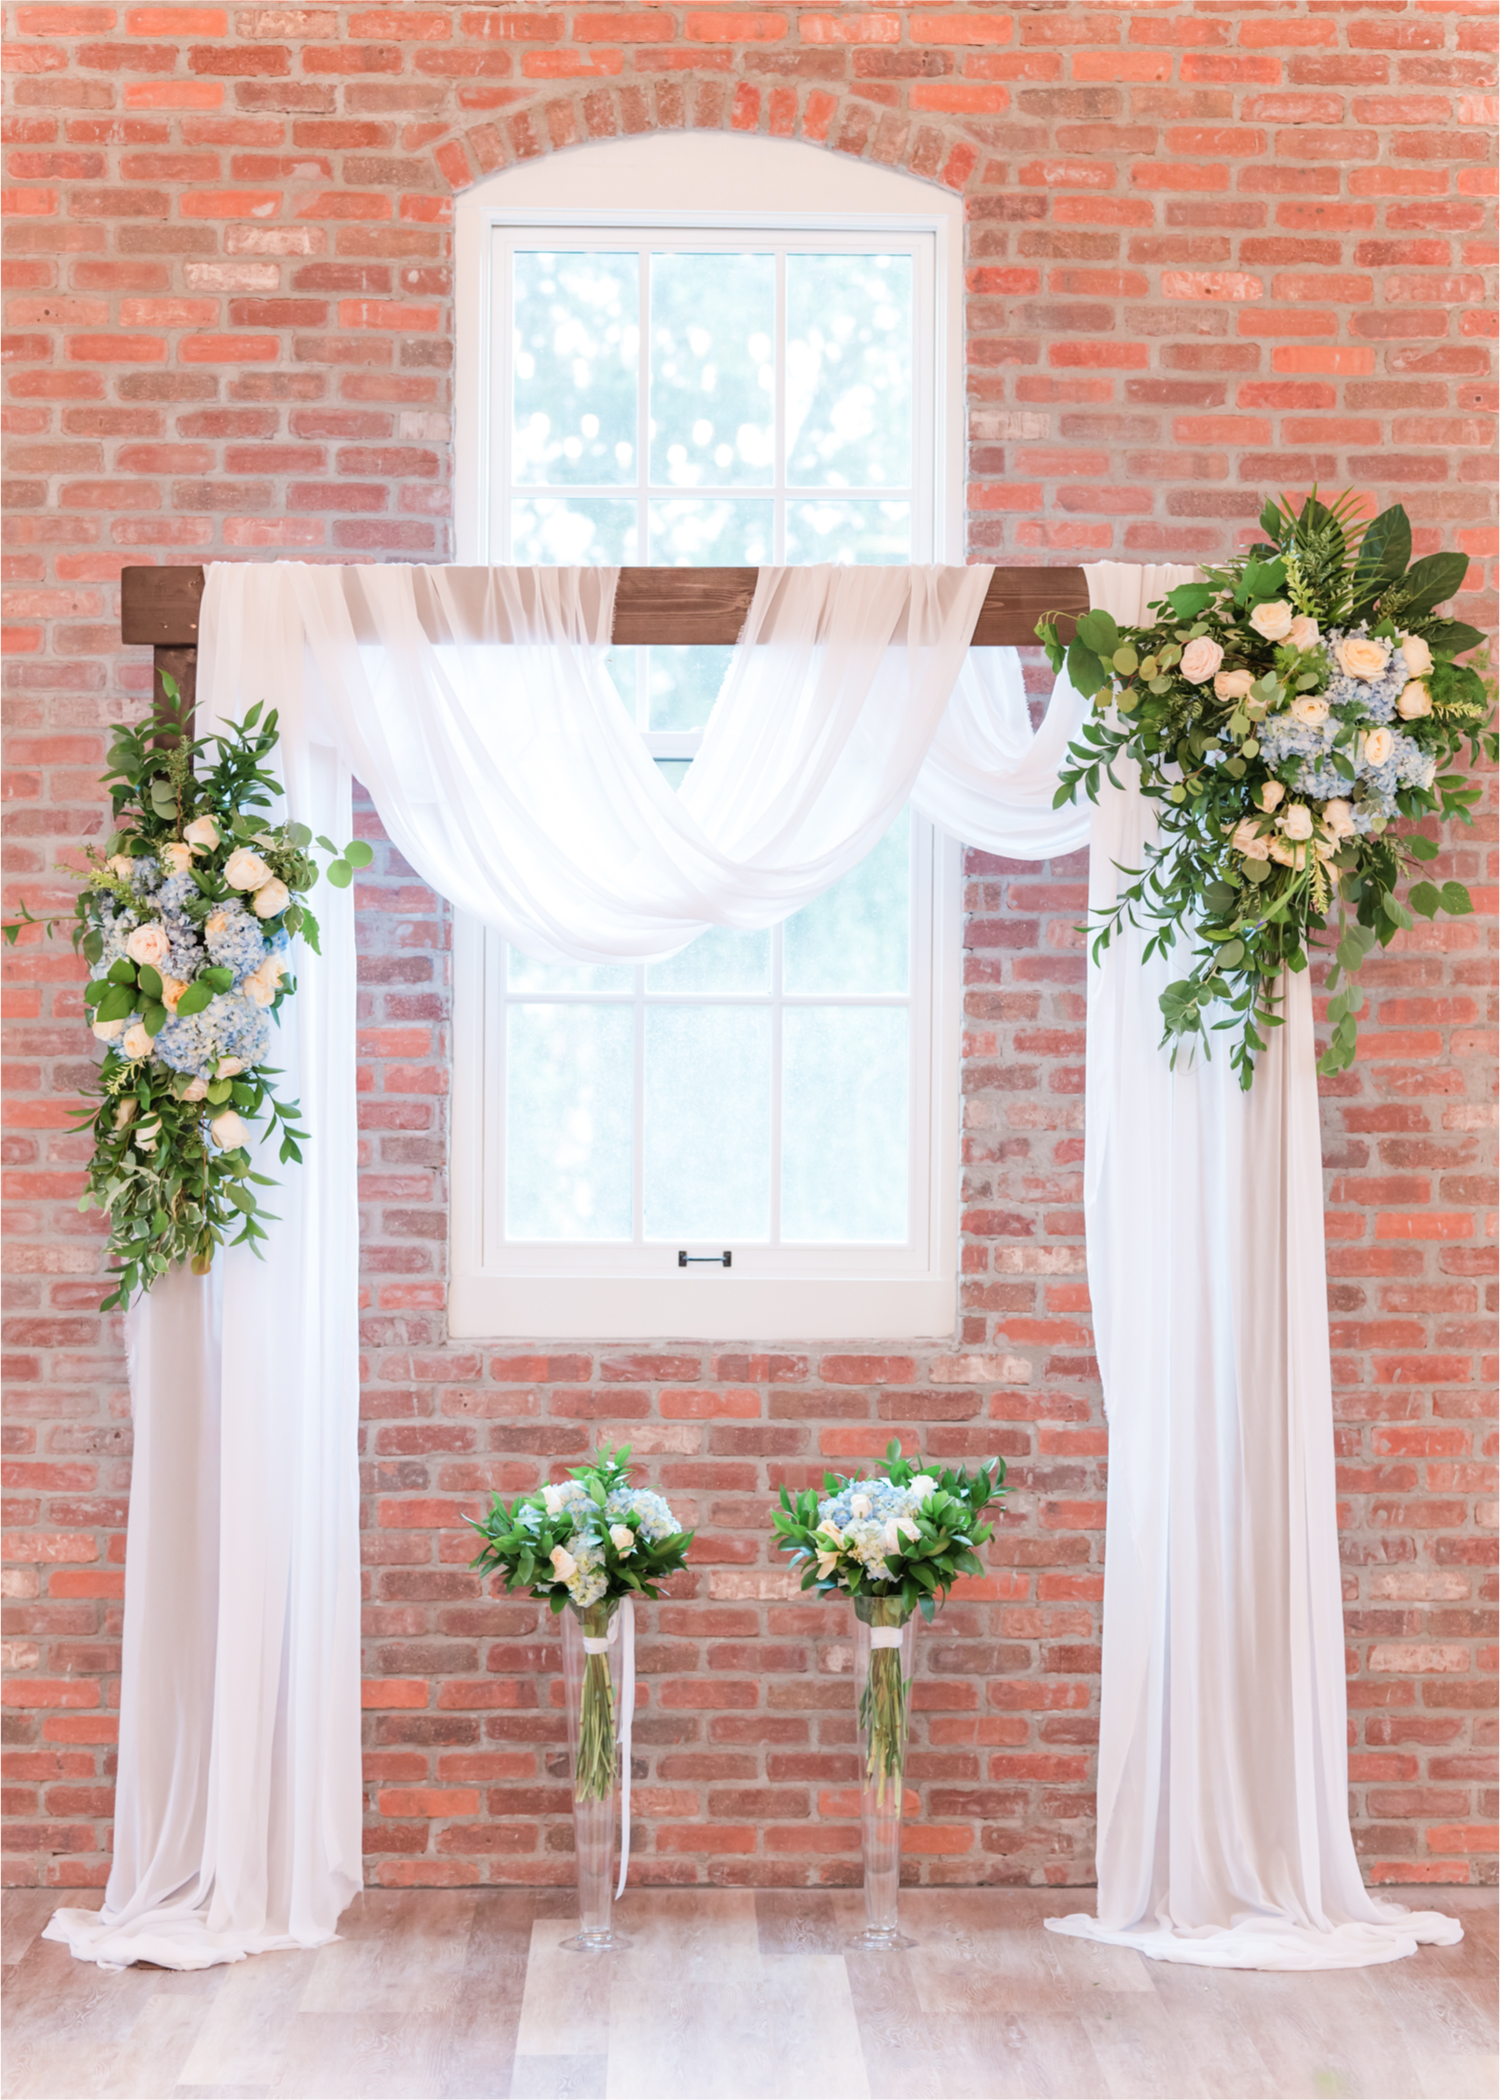 Romantic and Rustic Wedding at The Mill in Windsor | Britni Girard Photography | Colorado based wedding photography and videography team | Royal Blue and white Wedding - Floral Arch